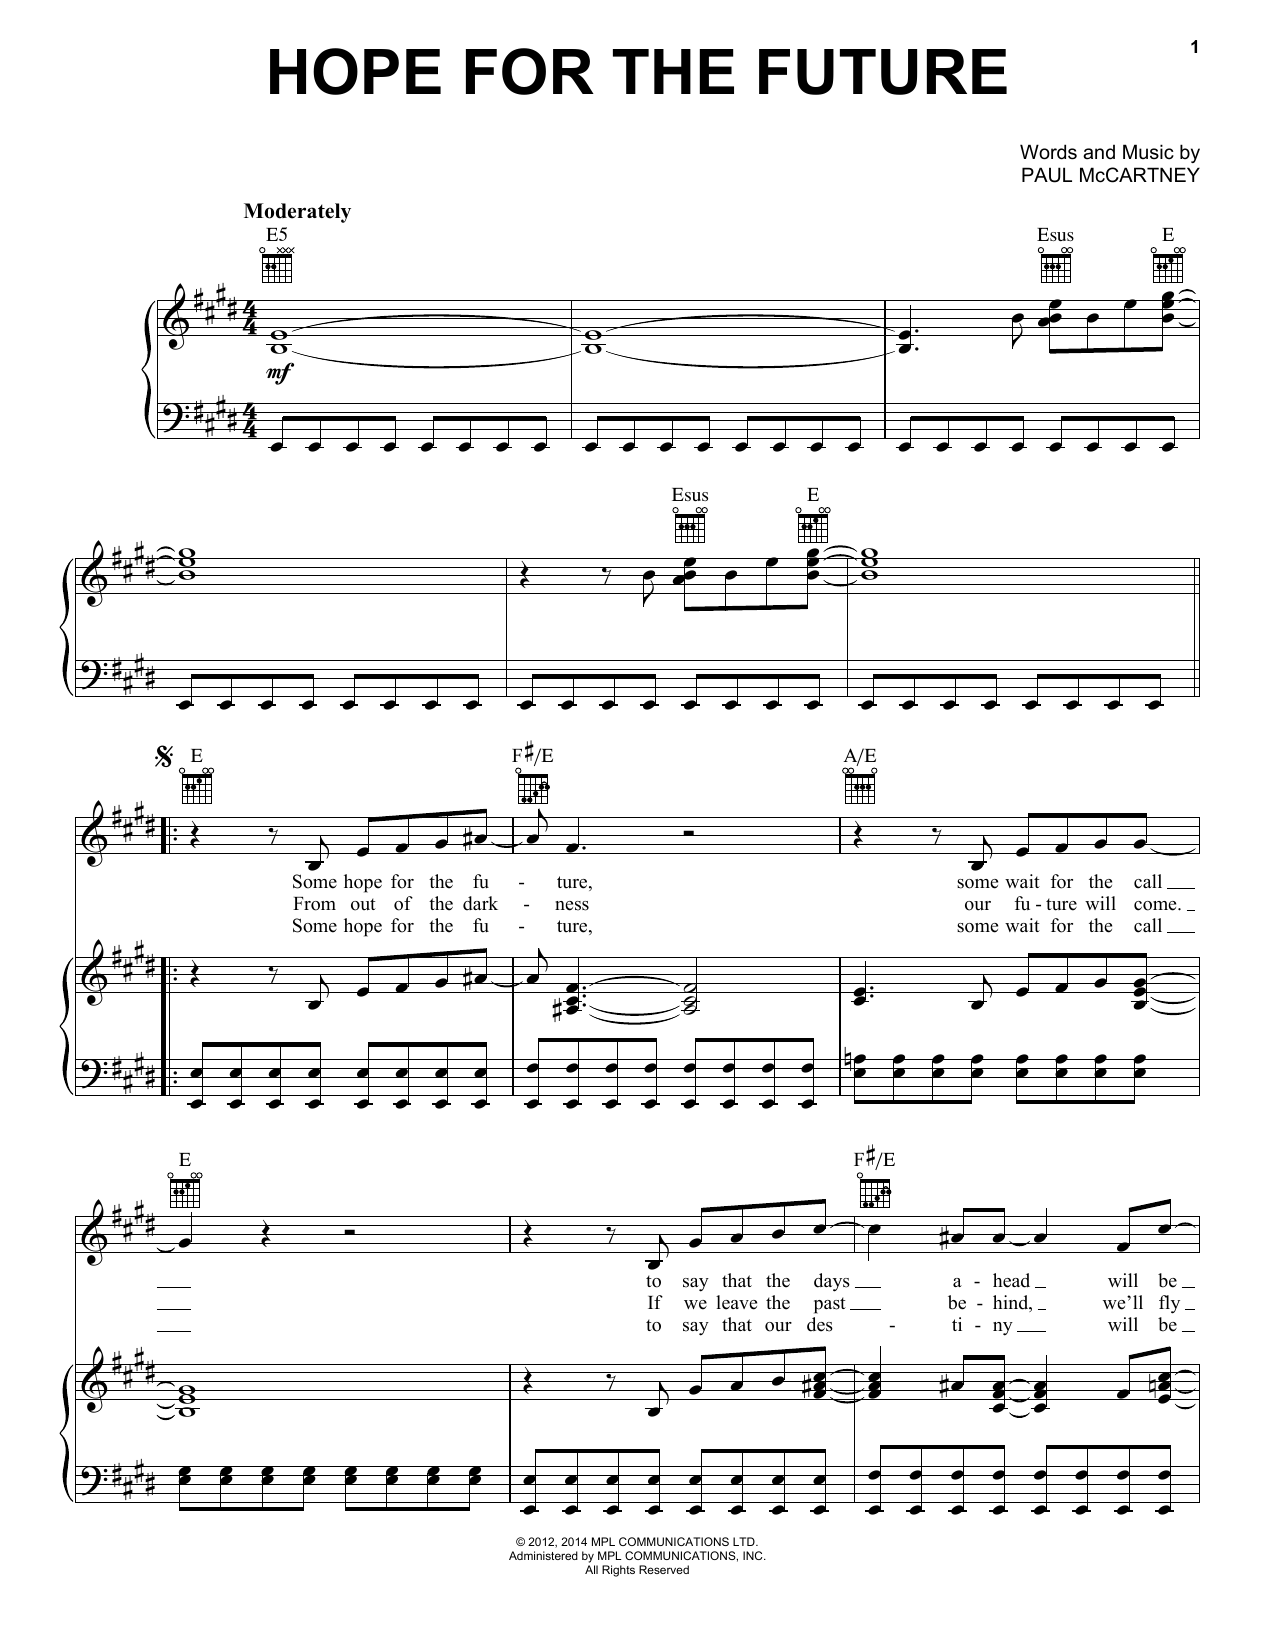 Download Paul McCartney Hope For The Future Sheet Music